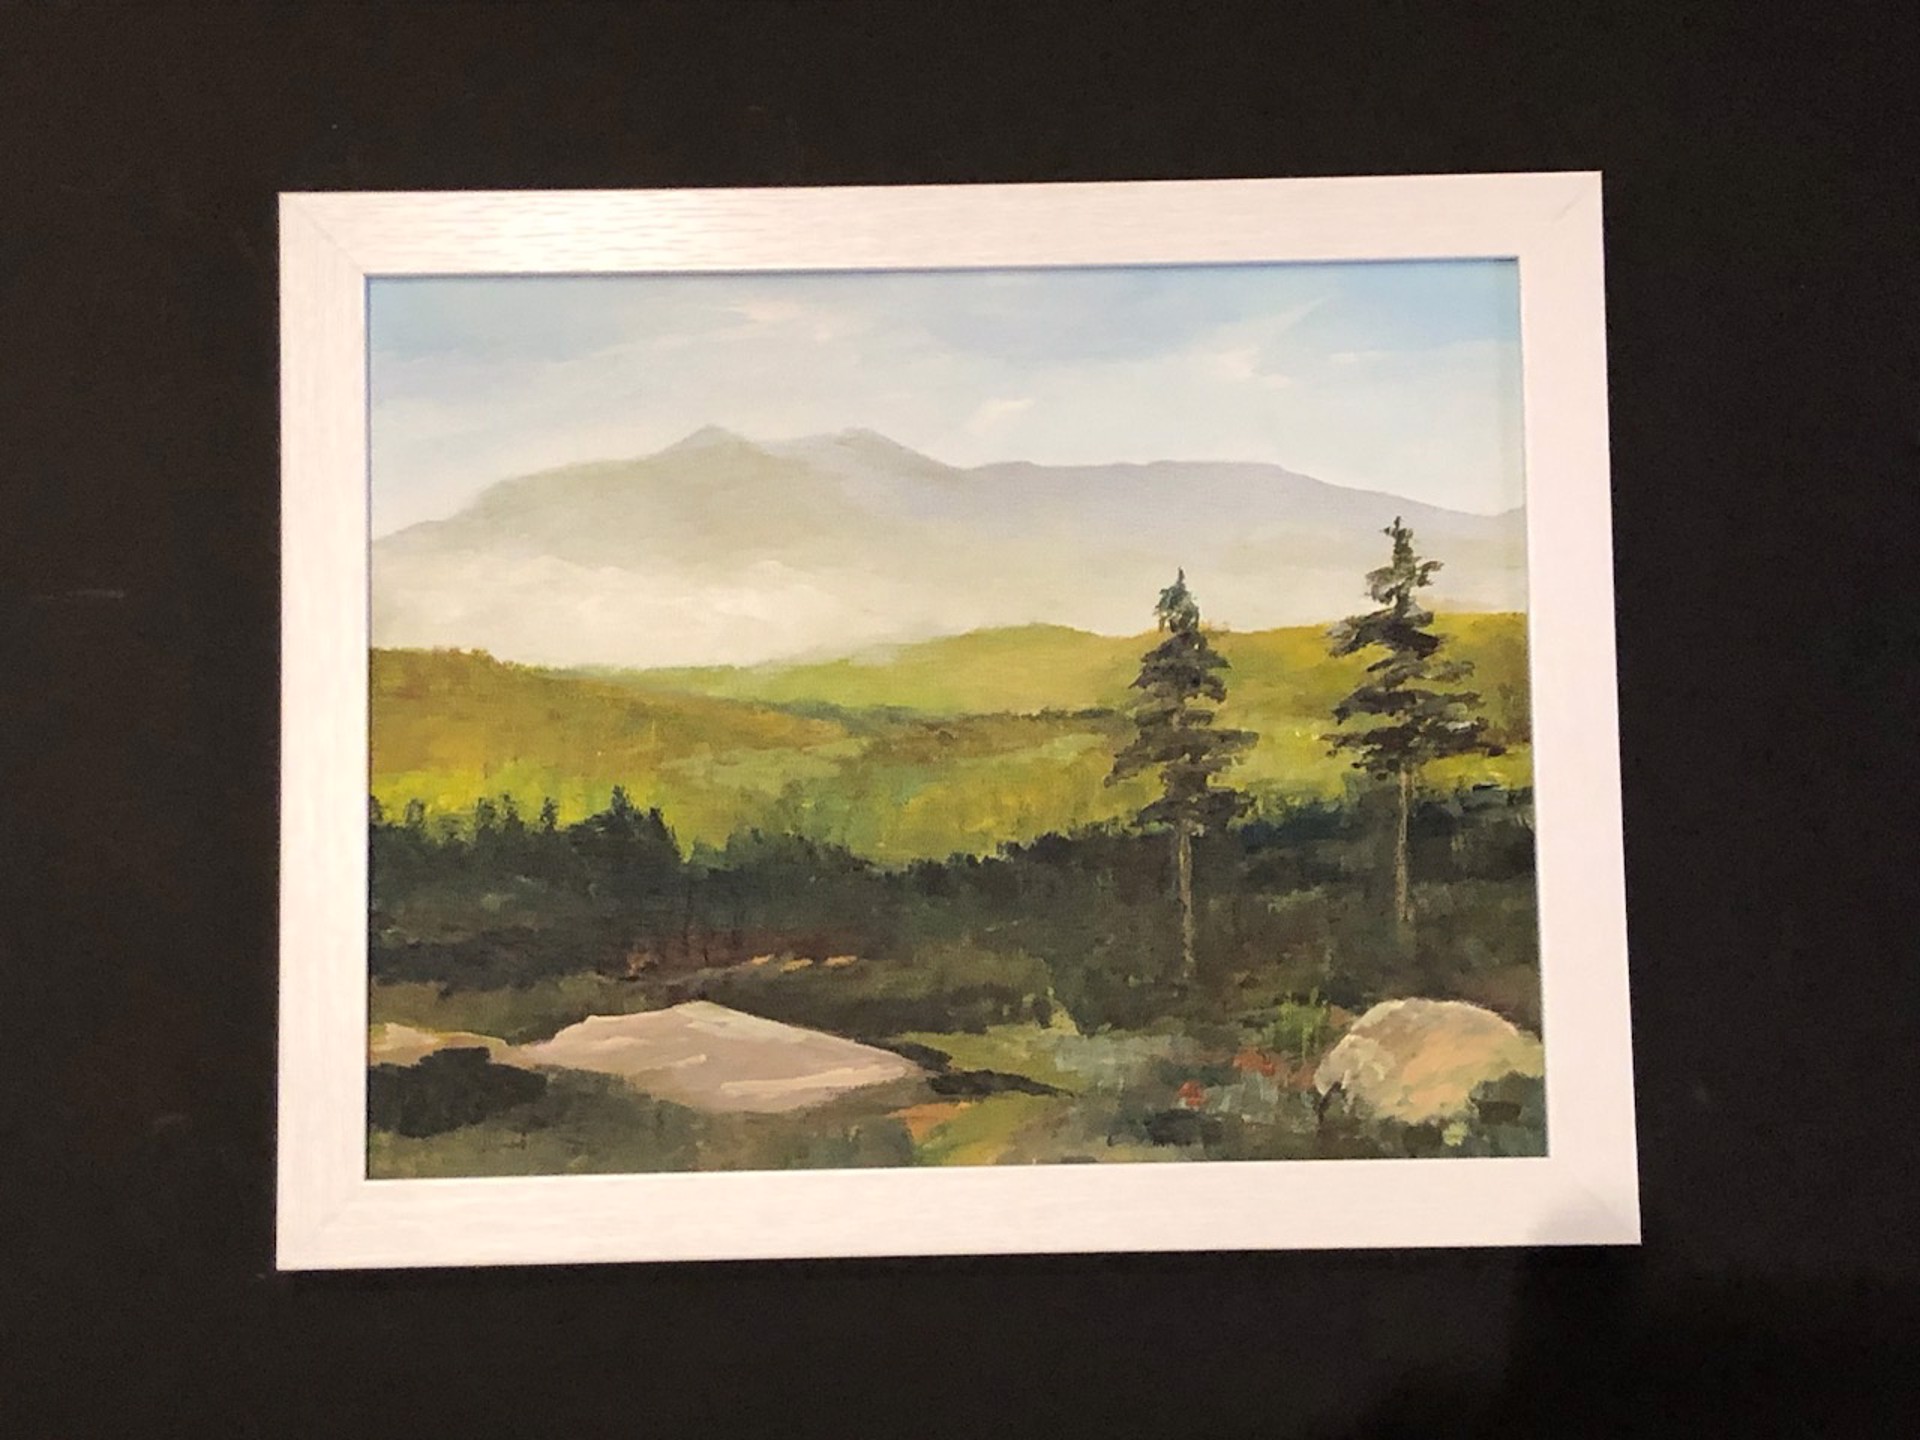 Katahdin From Woods and Water National Memorial by William Crosby - Small Works